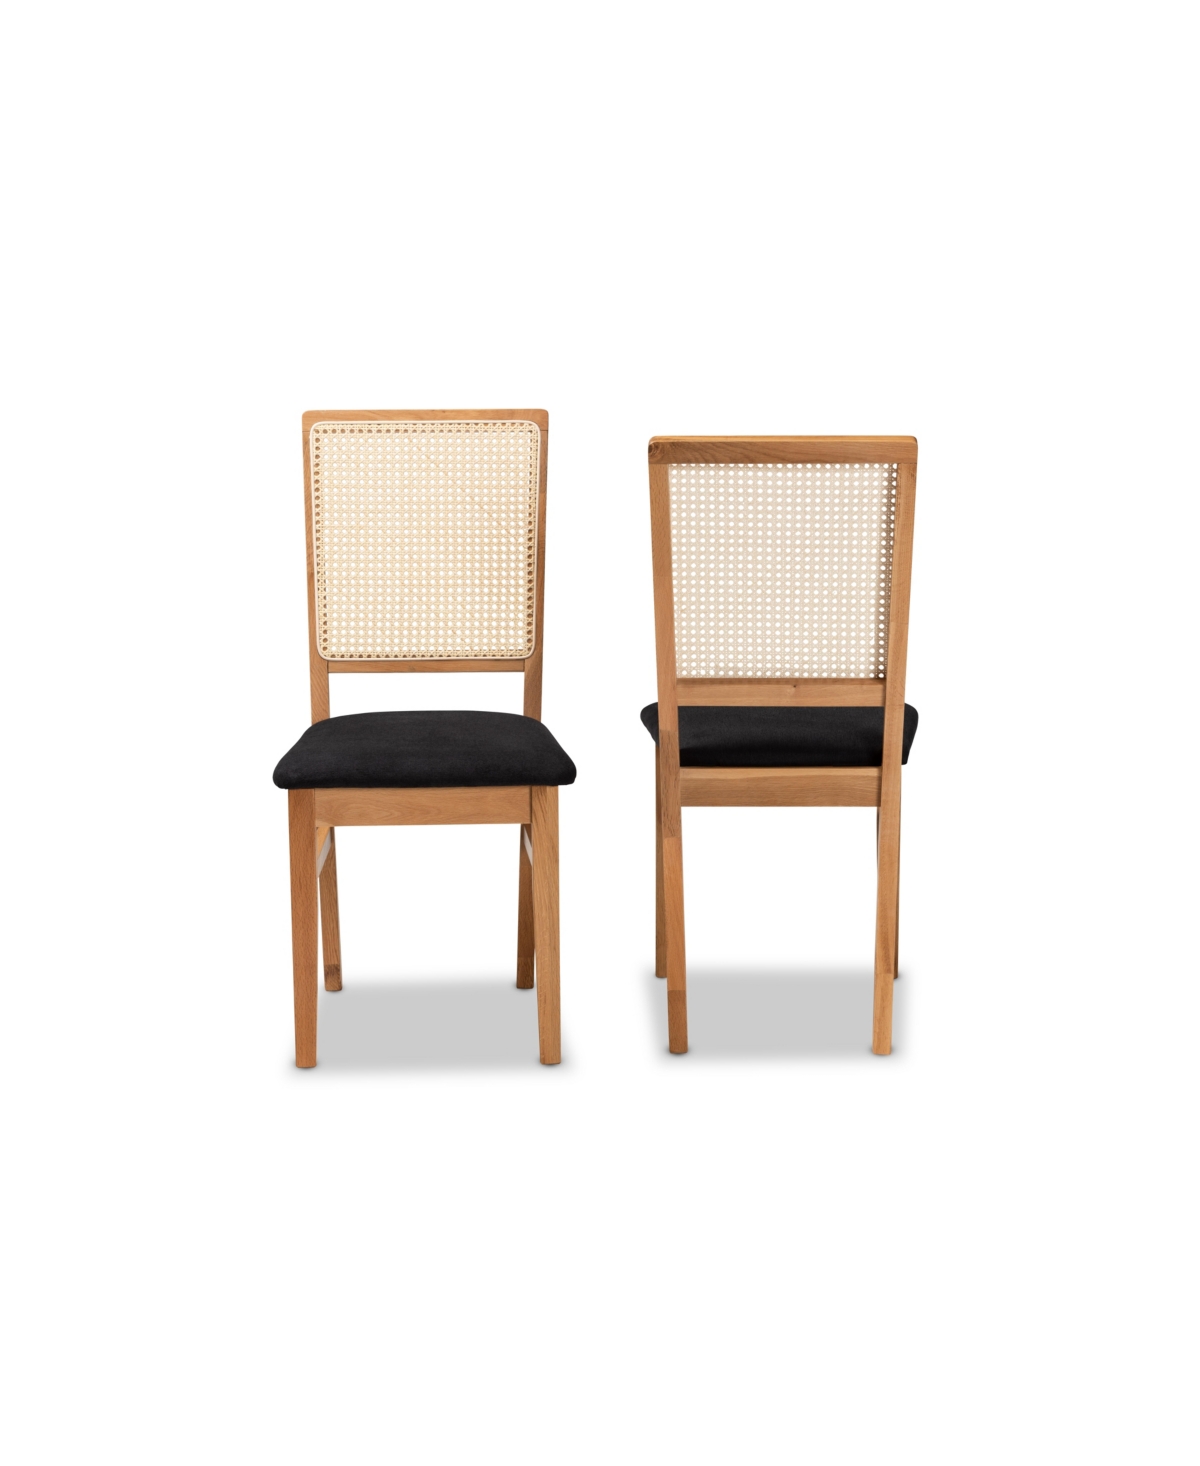 Shop Baxton Studio Idris Mid-century Modern Fabric Upholstered And Oak Finished 2-piece Rattan Dining Chair Set In Black,oak Brown